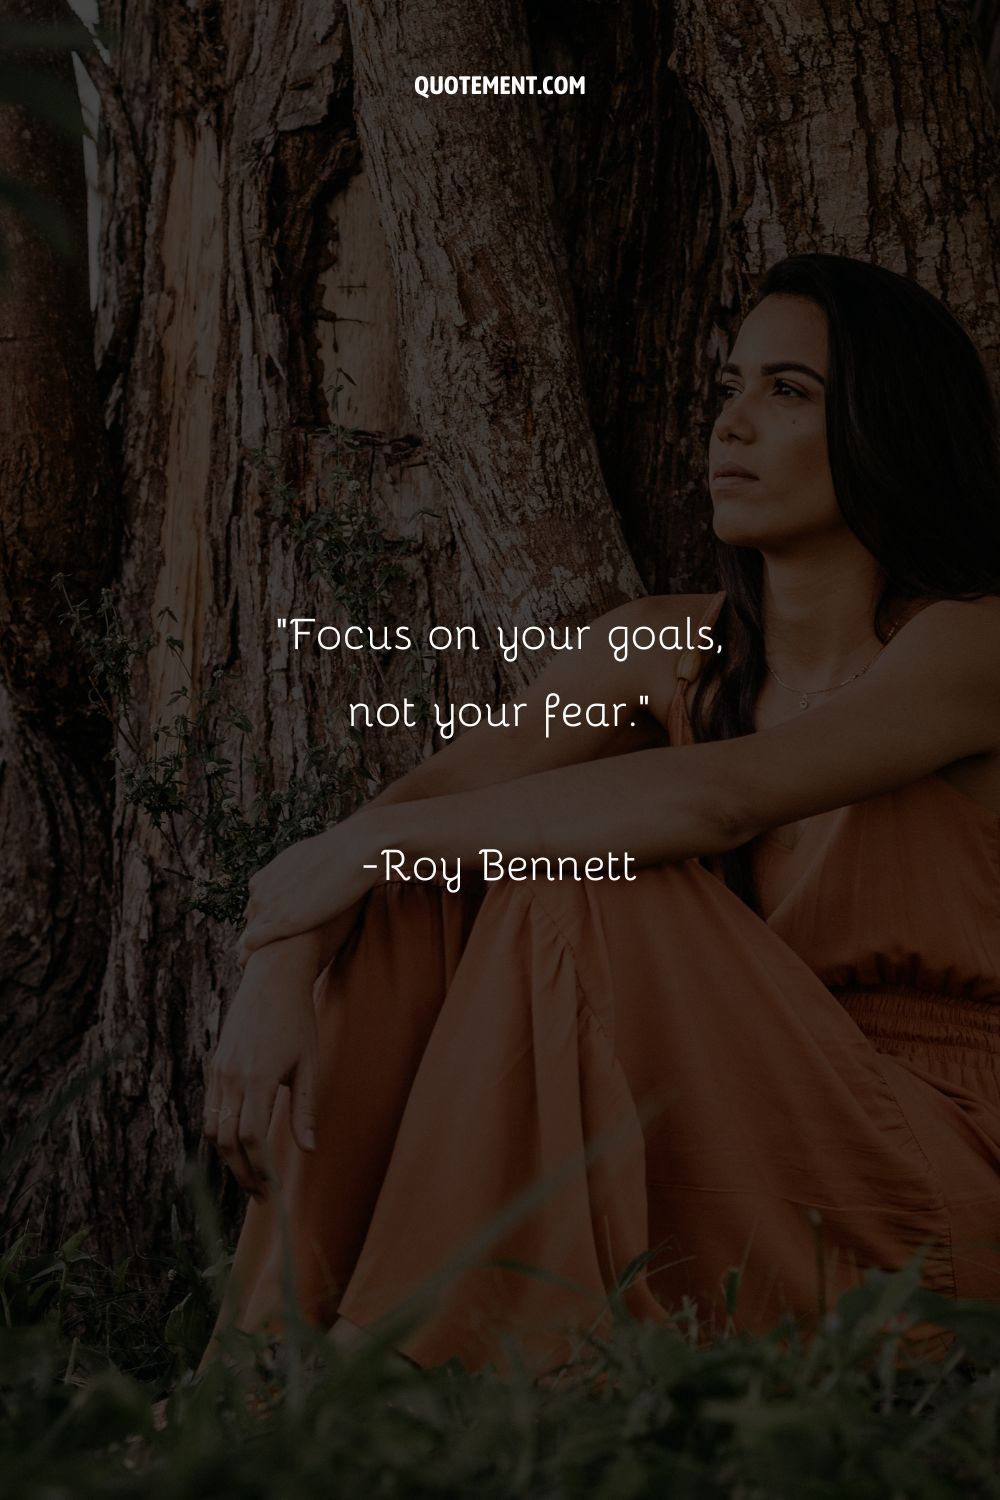 Focus on your goals, not your fear